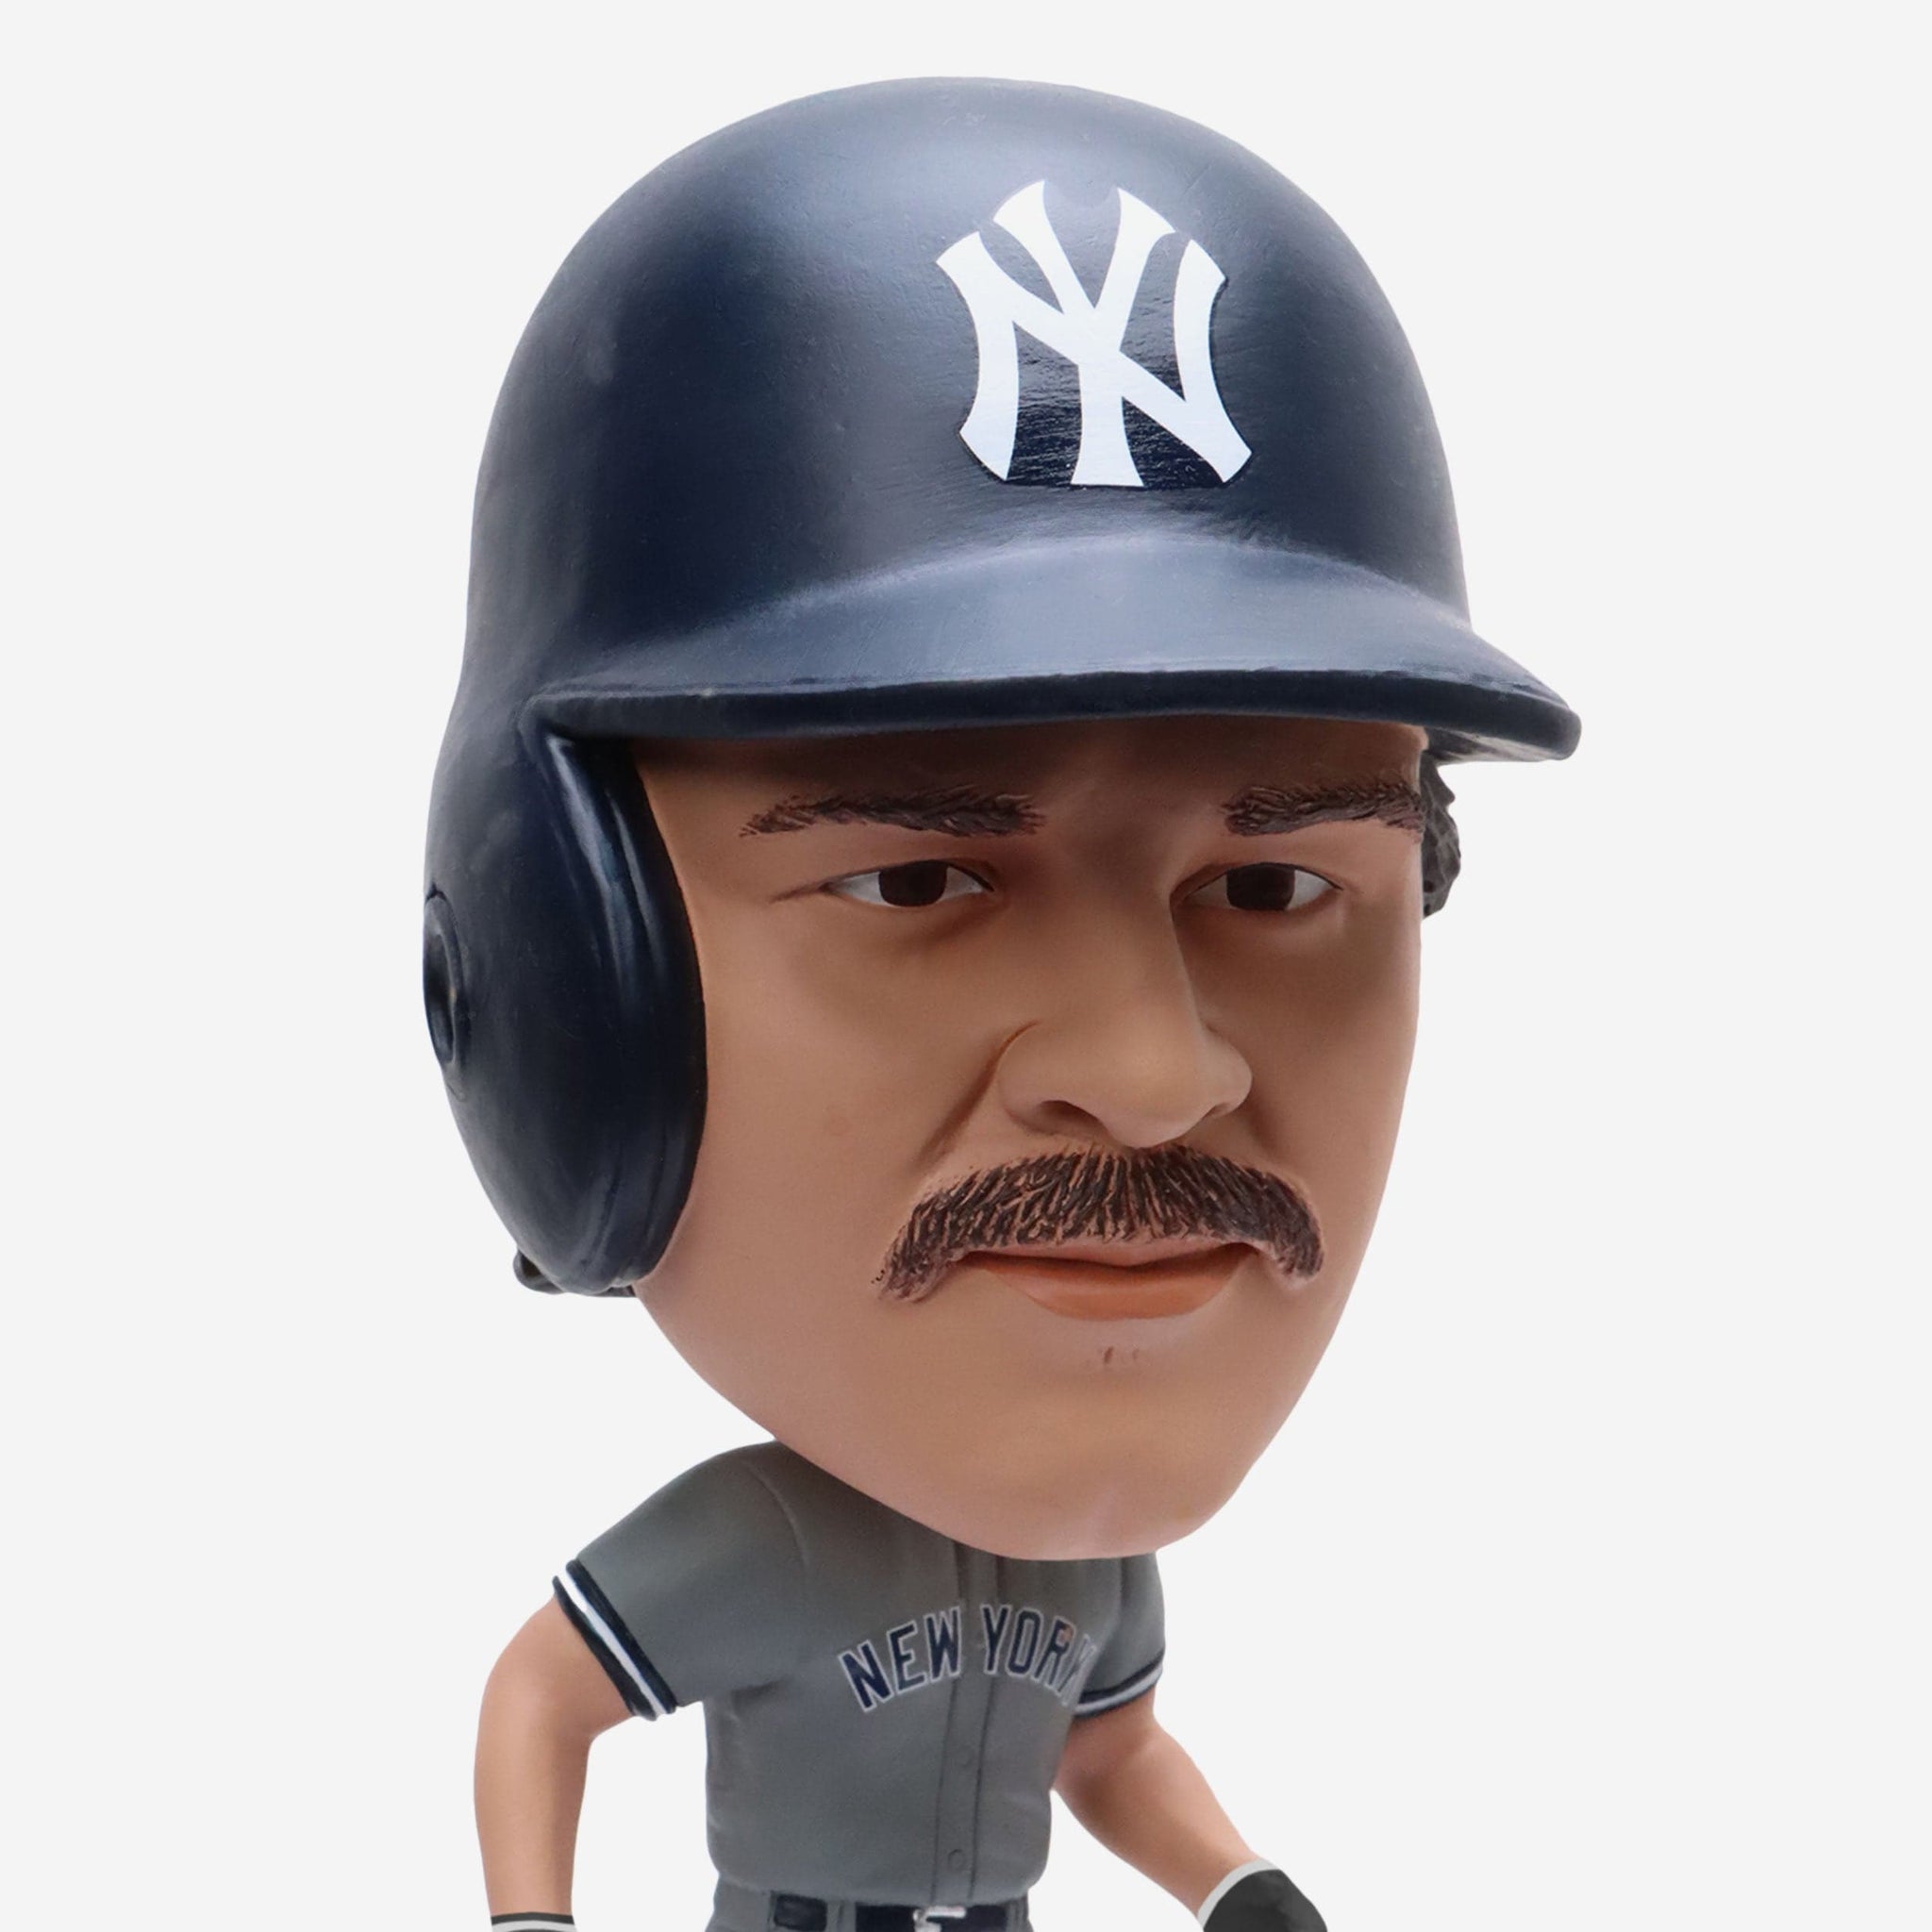 Don Mattingly New York Yankees Field Stripe Variant Bighead Bobblehead Officially Licensed by MLB